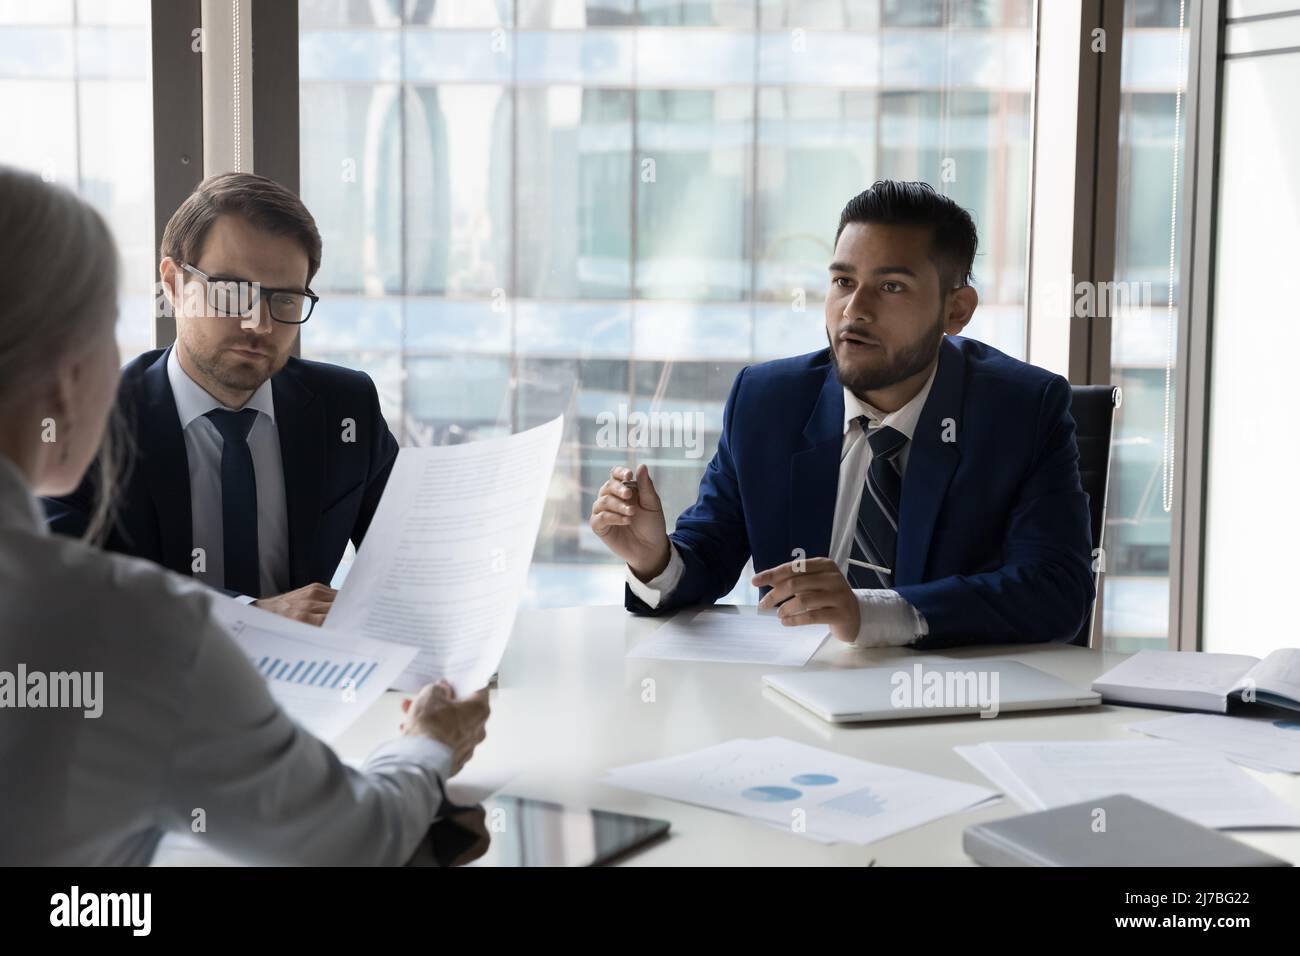 Job candidate and employer discussing work experience Stock Photo